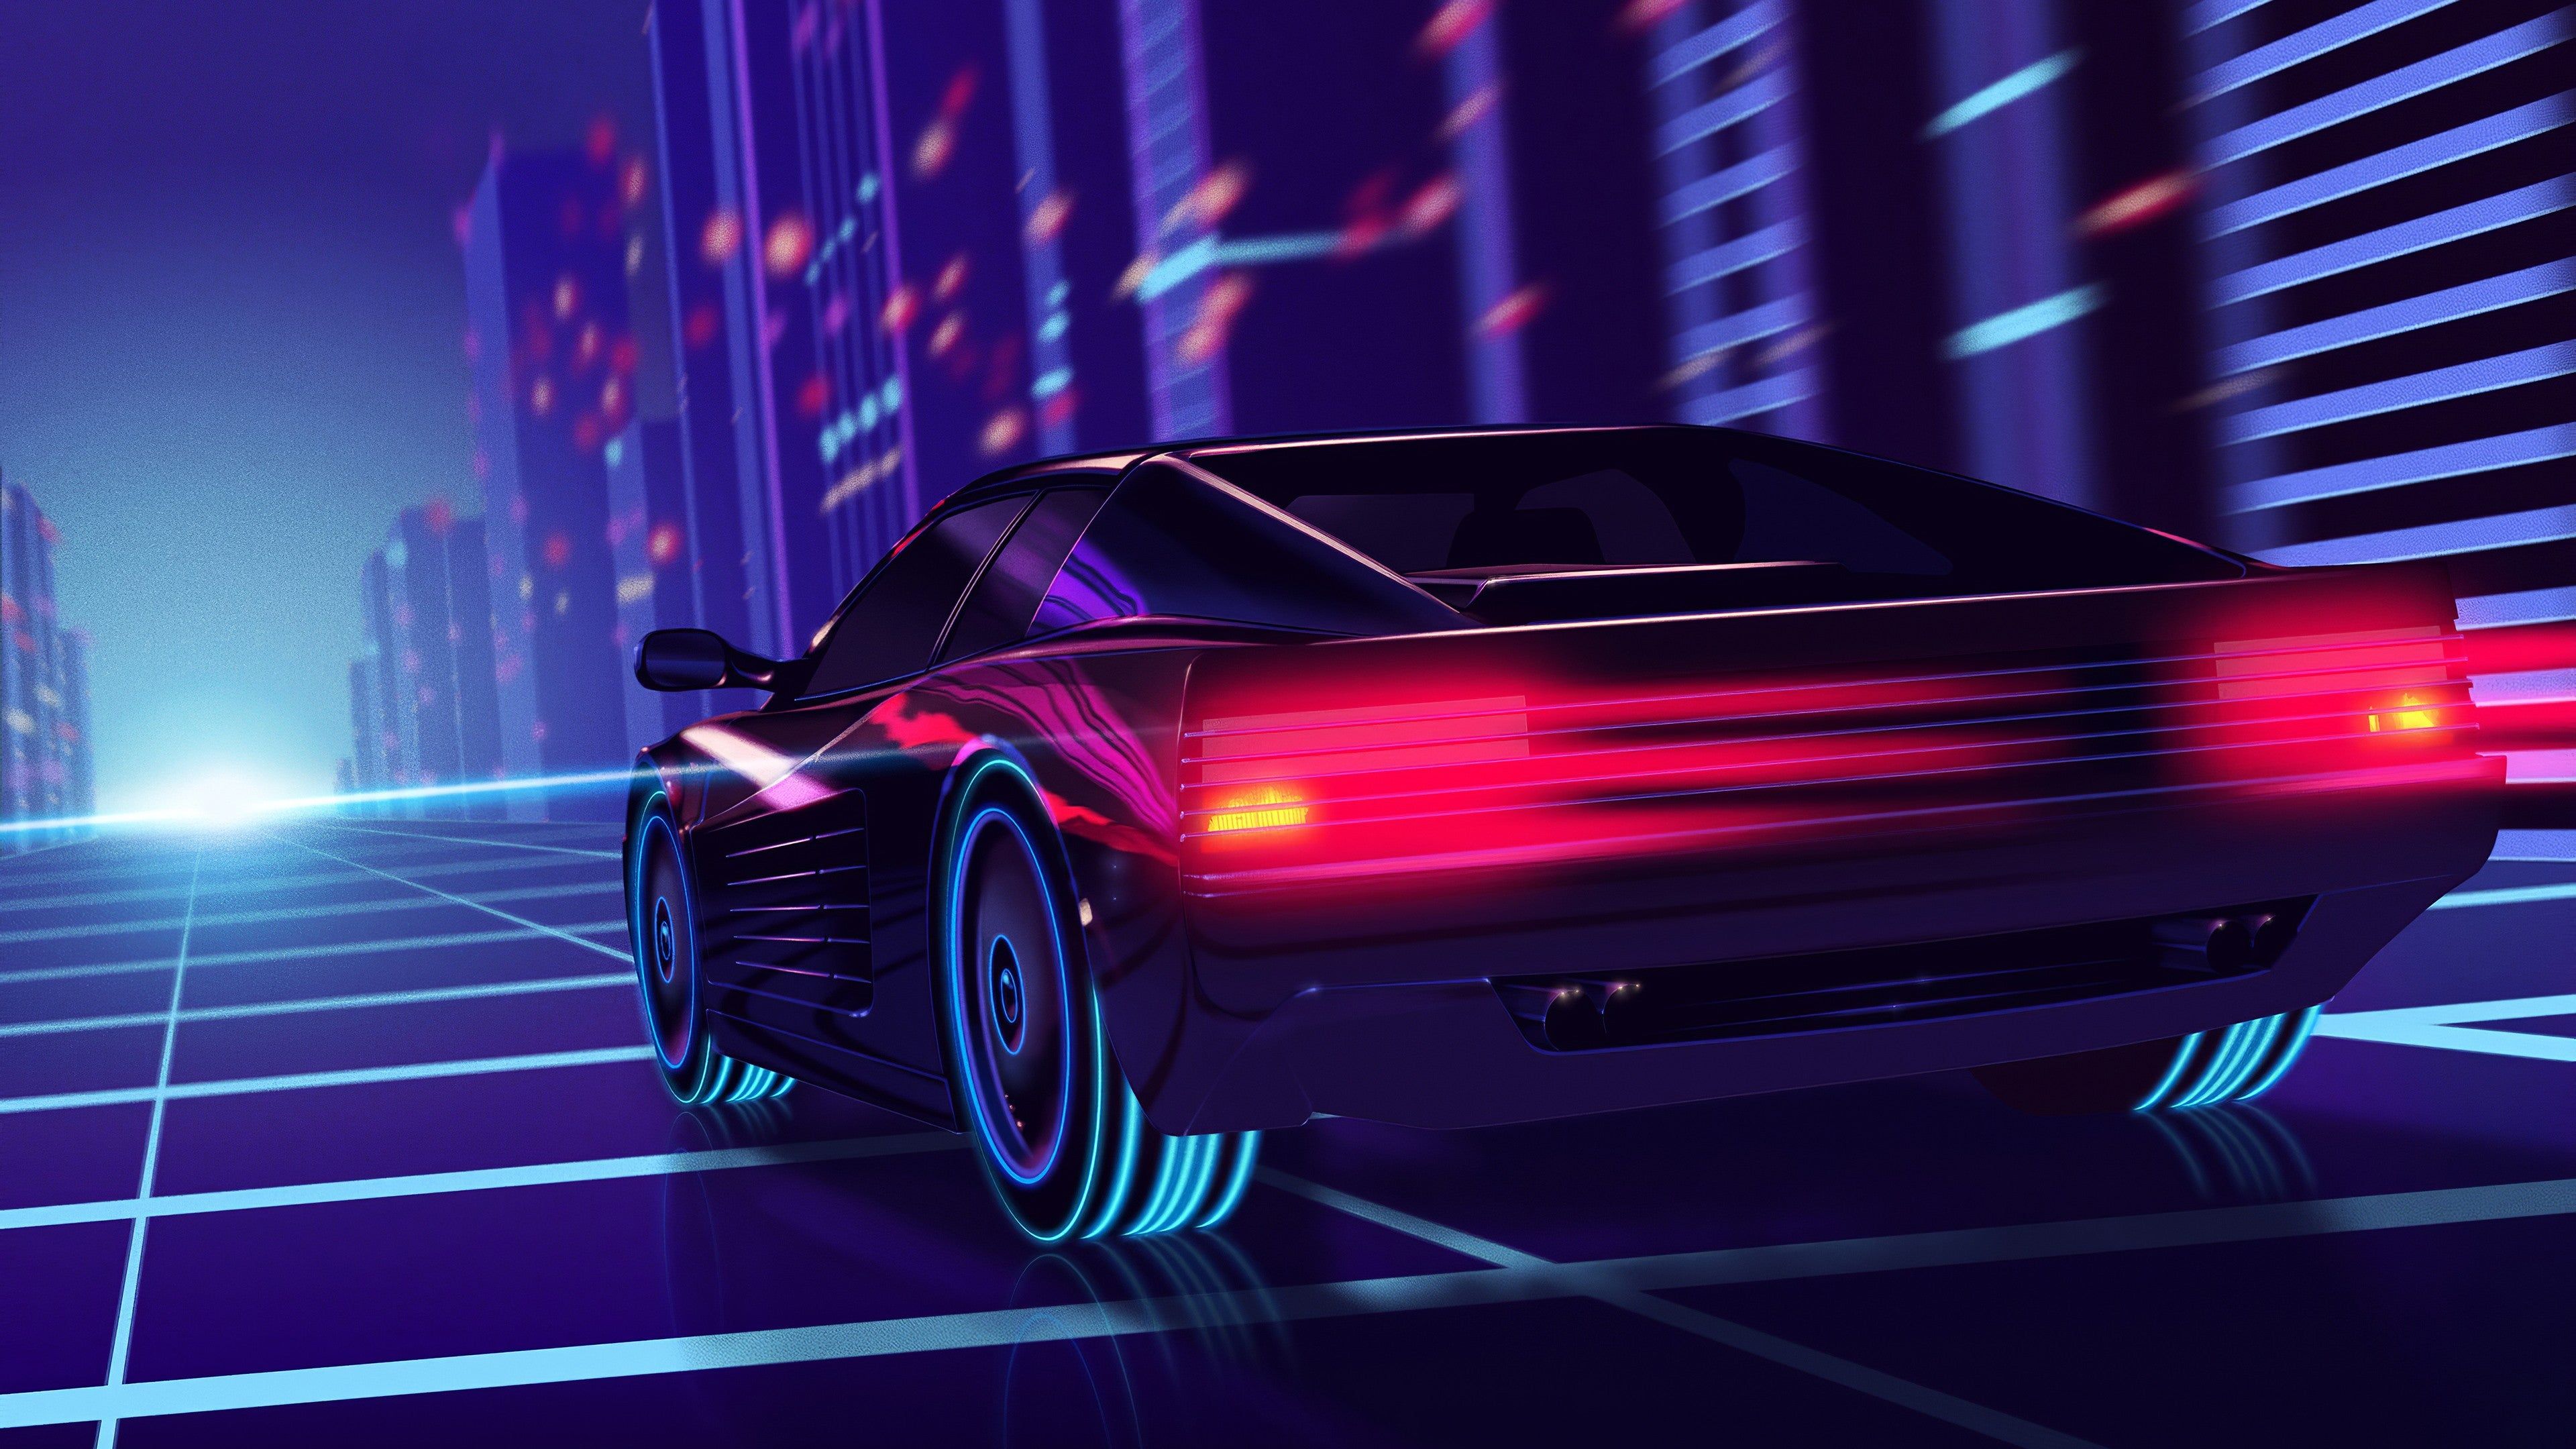 Cool Neon Cars Wallpapers Wallpapers